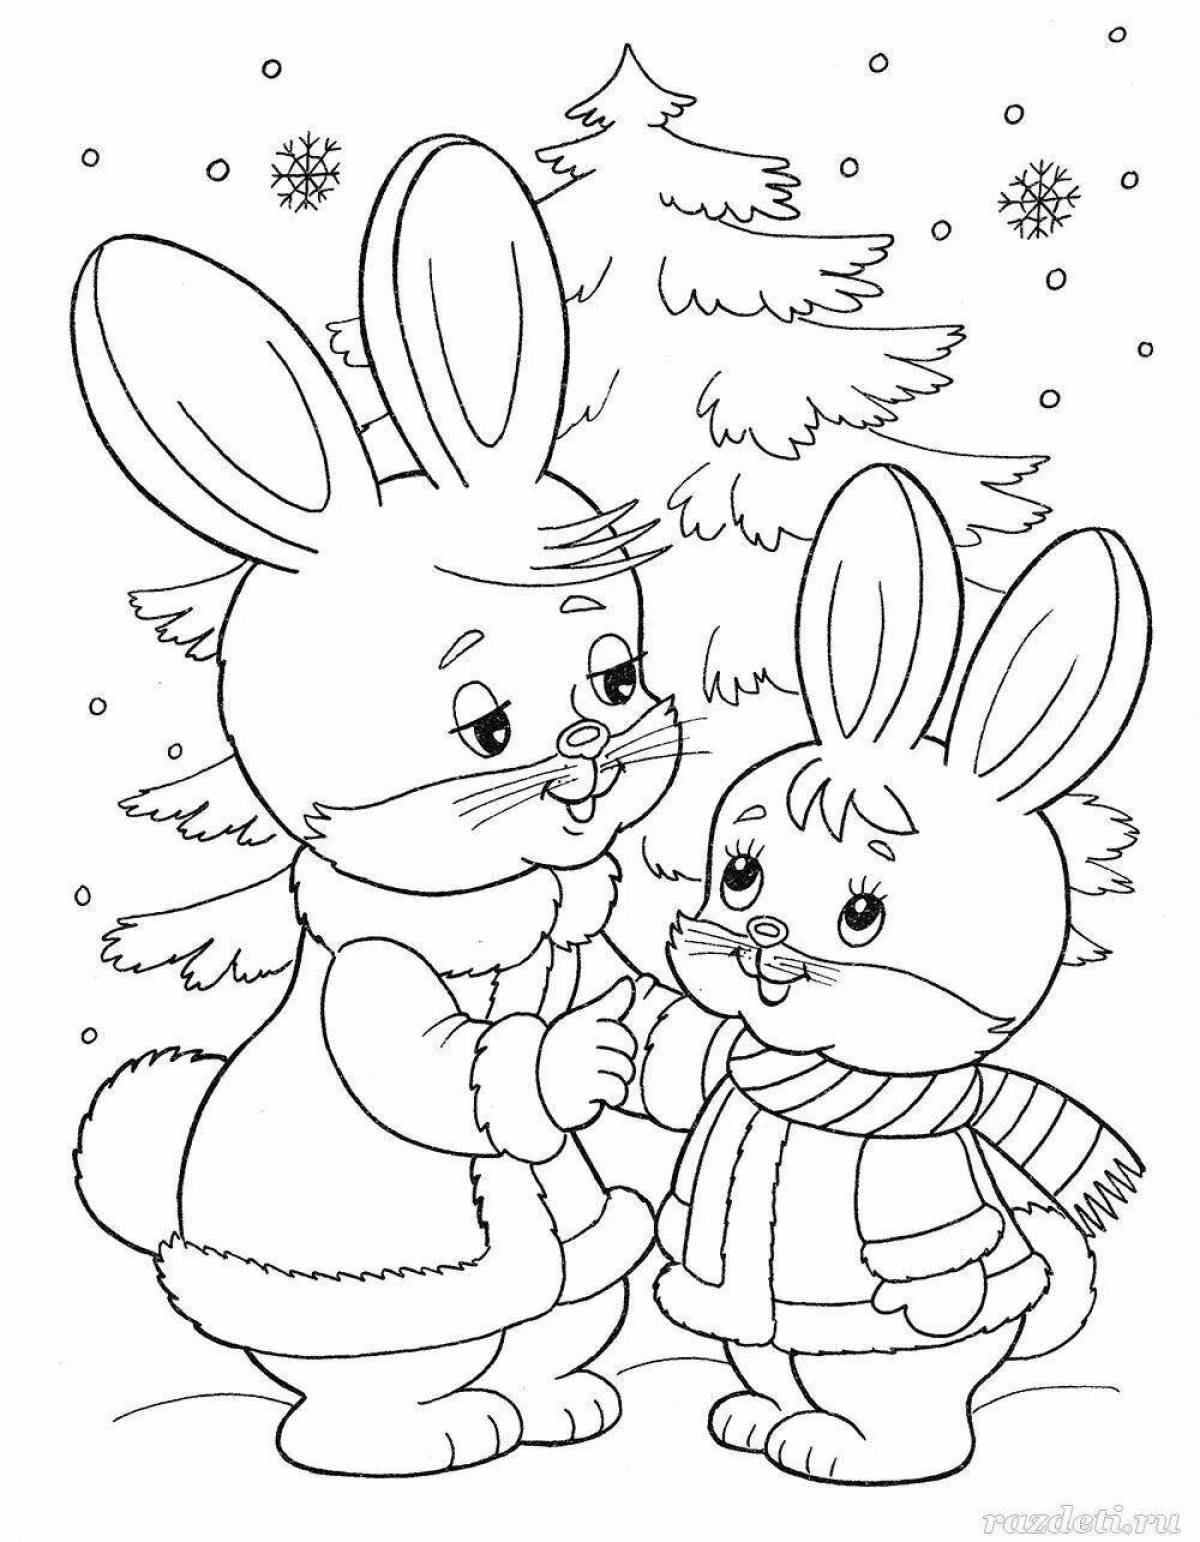 Funny winter animals coloring book for kids 3-4 years old